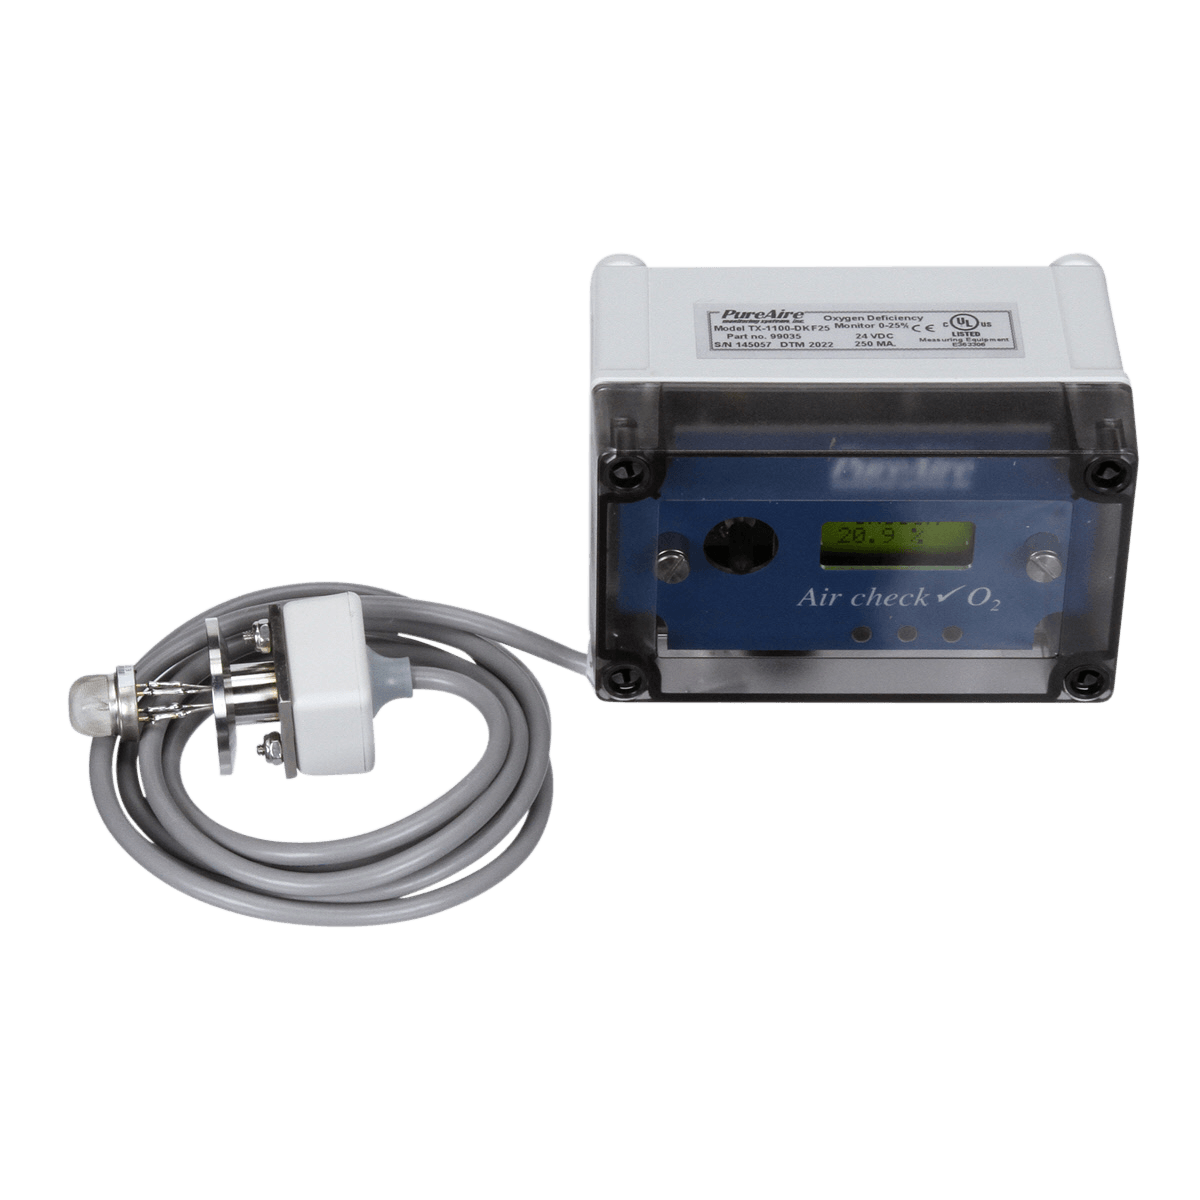 Oxygen Deficiency Monitor by PureAire. Oxygen Monitor, O2 Depletion